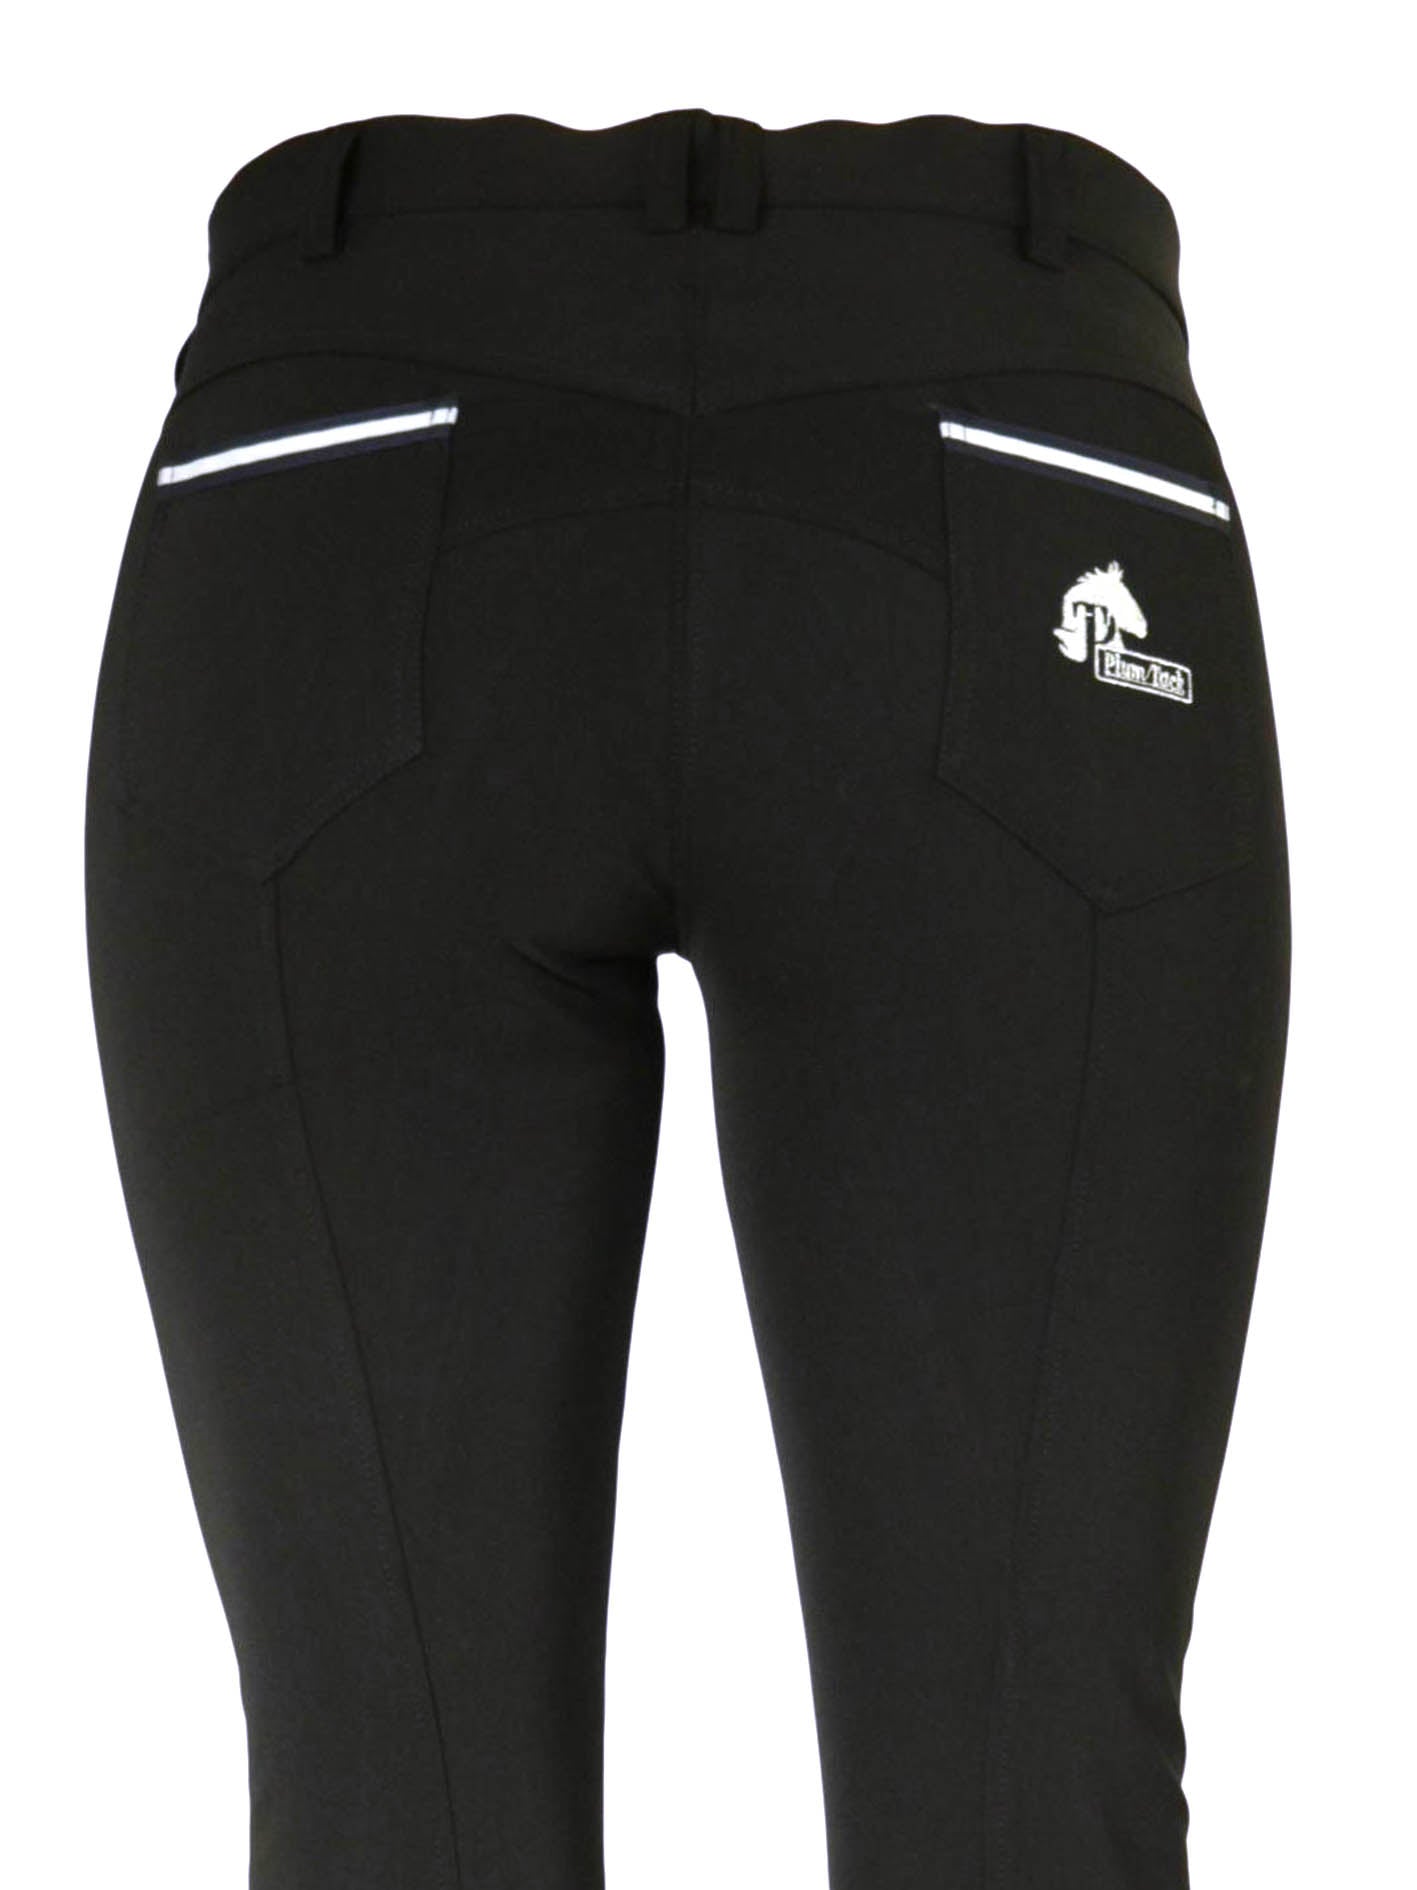 CoolMax Black Breeches in sizes 6 to 28 - No Silicone